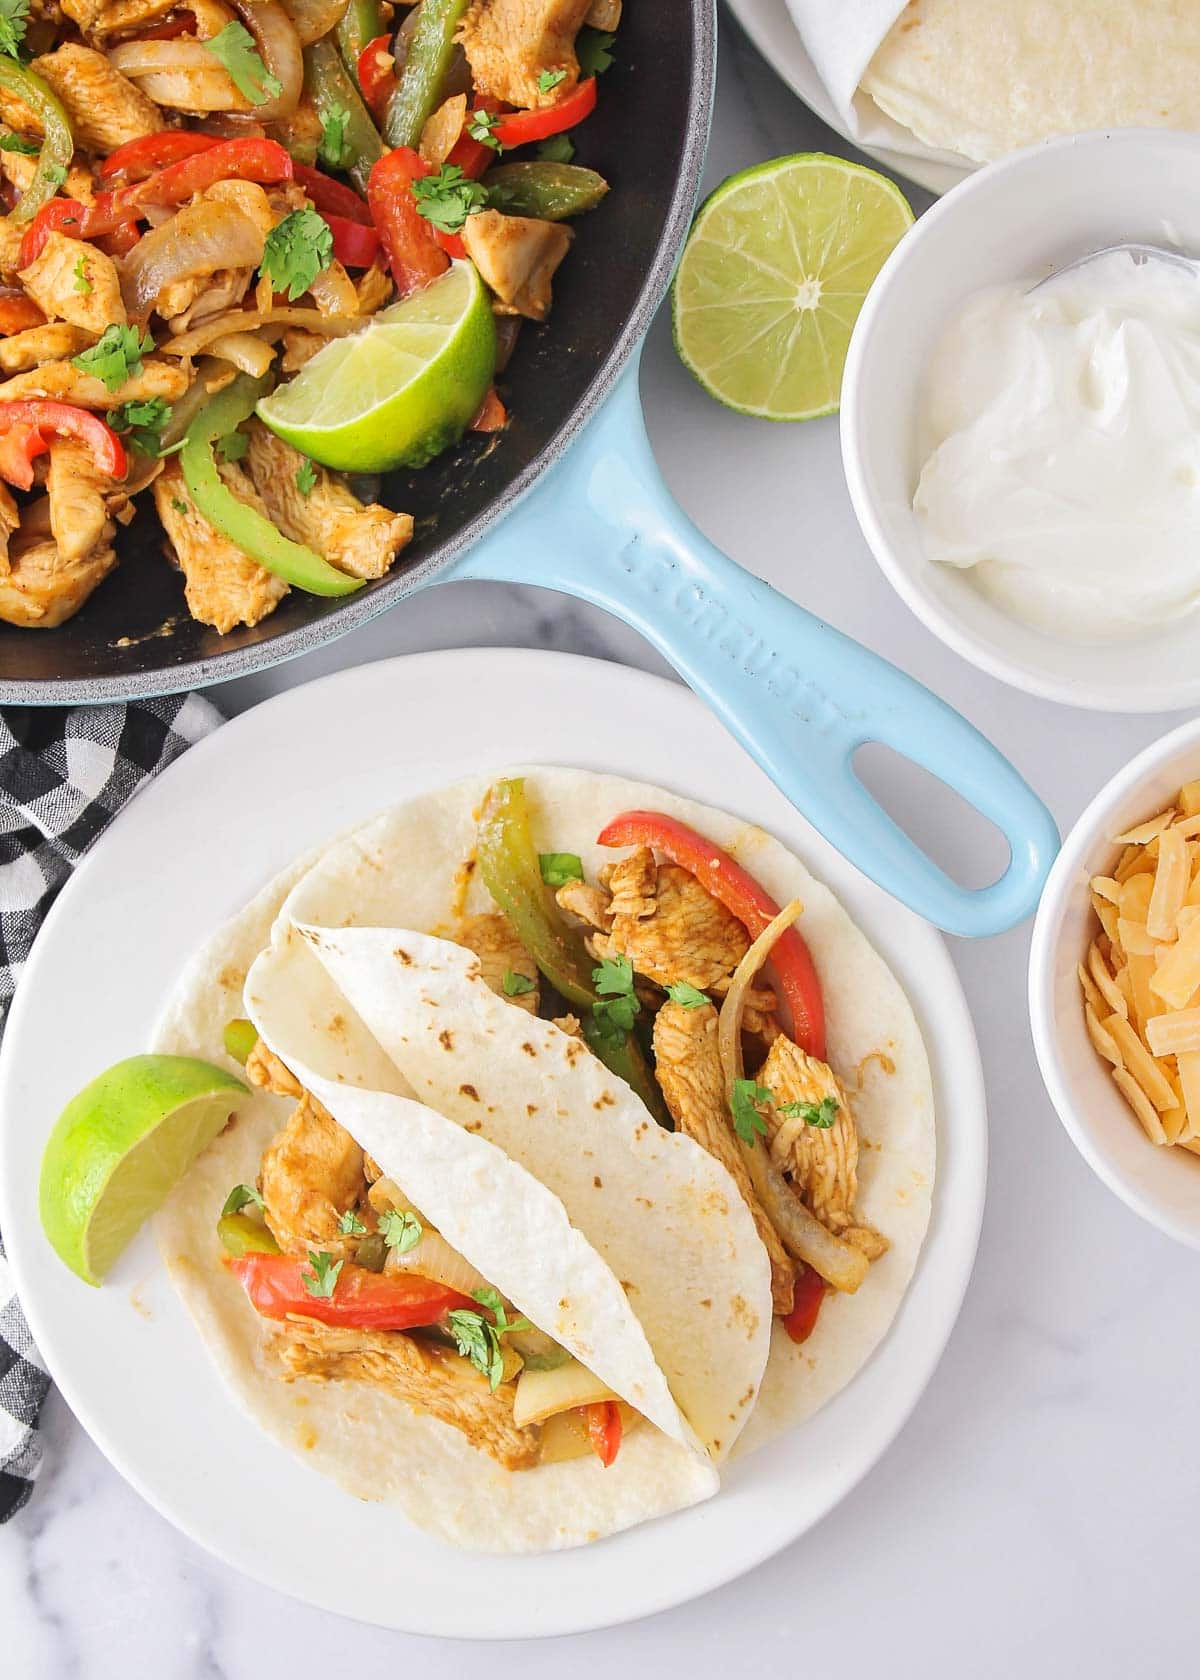 Chicken fajitas served up on a white plate.